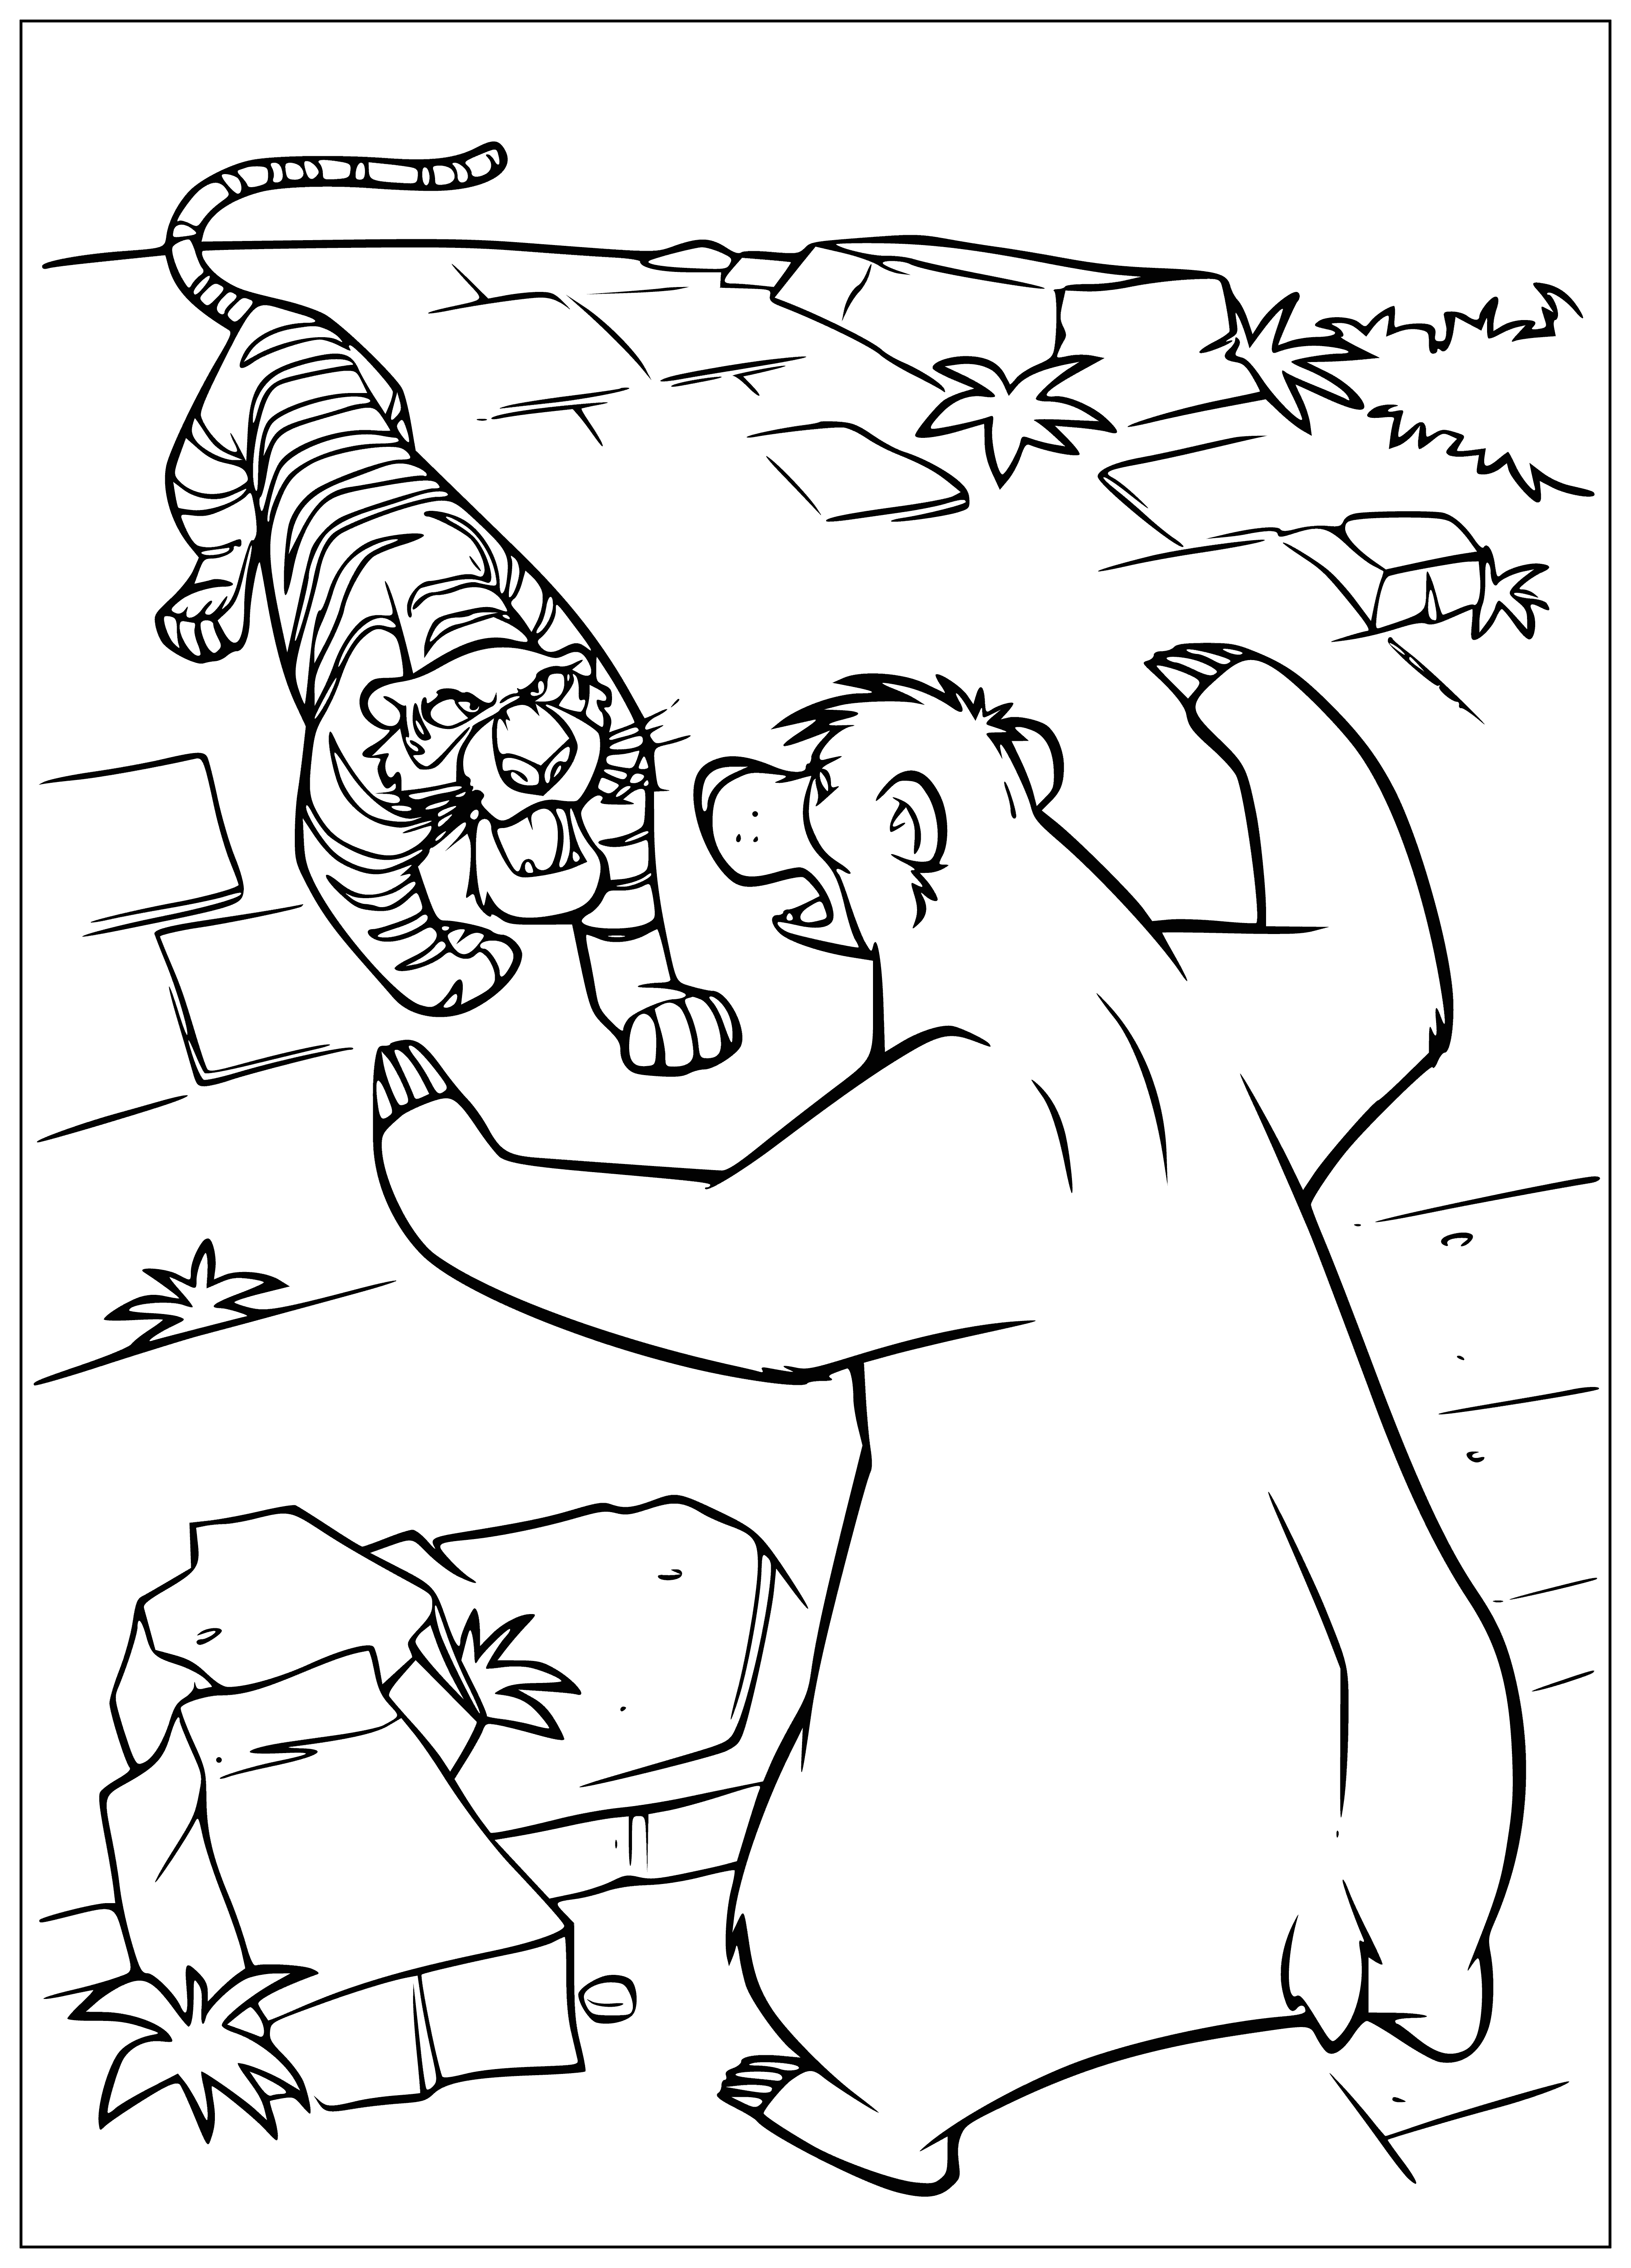 coloring page: Baloo & Shere Khan take a nap together in the jungle - Baloo on Shere Khan's head, both with satisfied smirks & closed eyes.